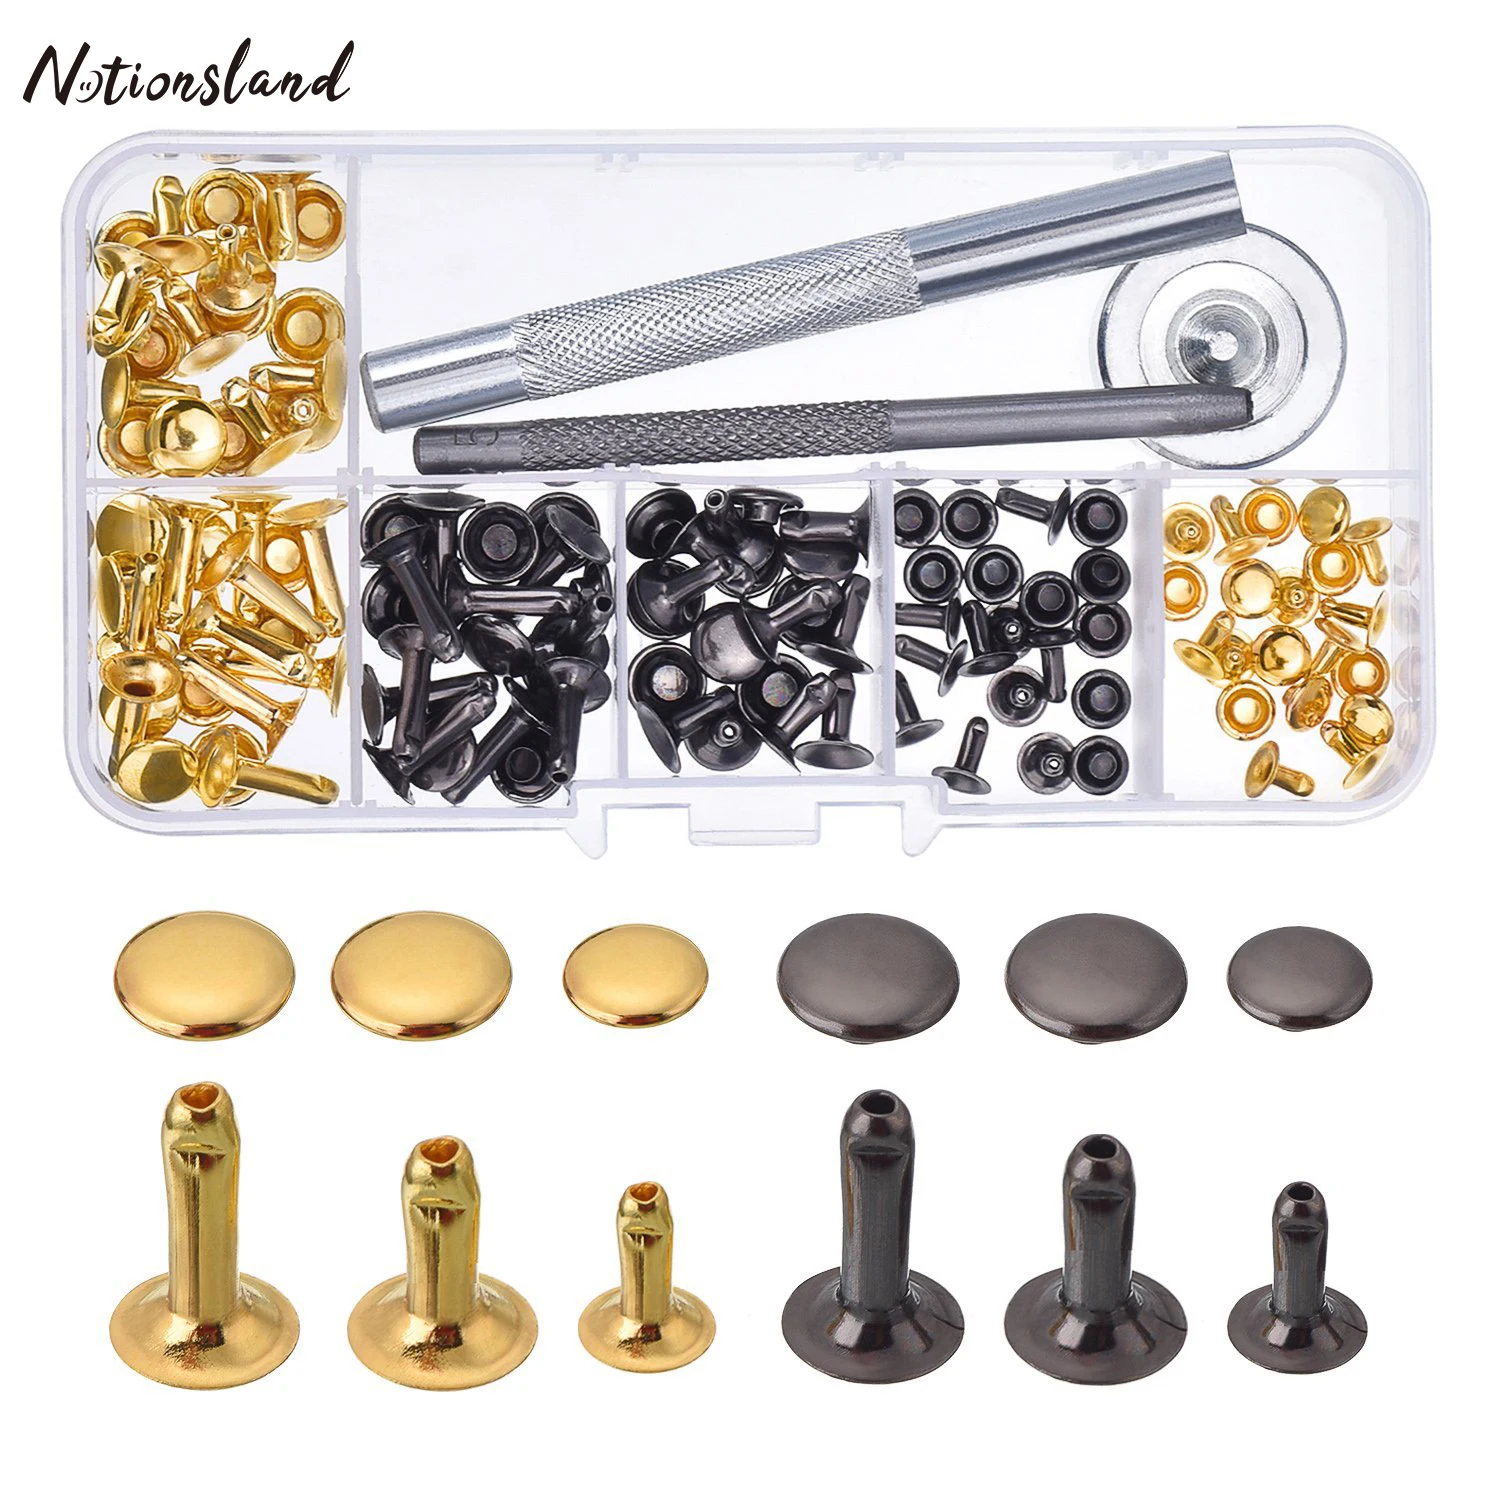 

60 set 2 Color 3 Sizes Leather Rivets Double Cap Rivet Tubular Metal Studs with 3 Pieces Setting Tool Kit for Leather Craft